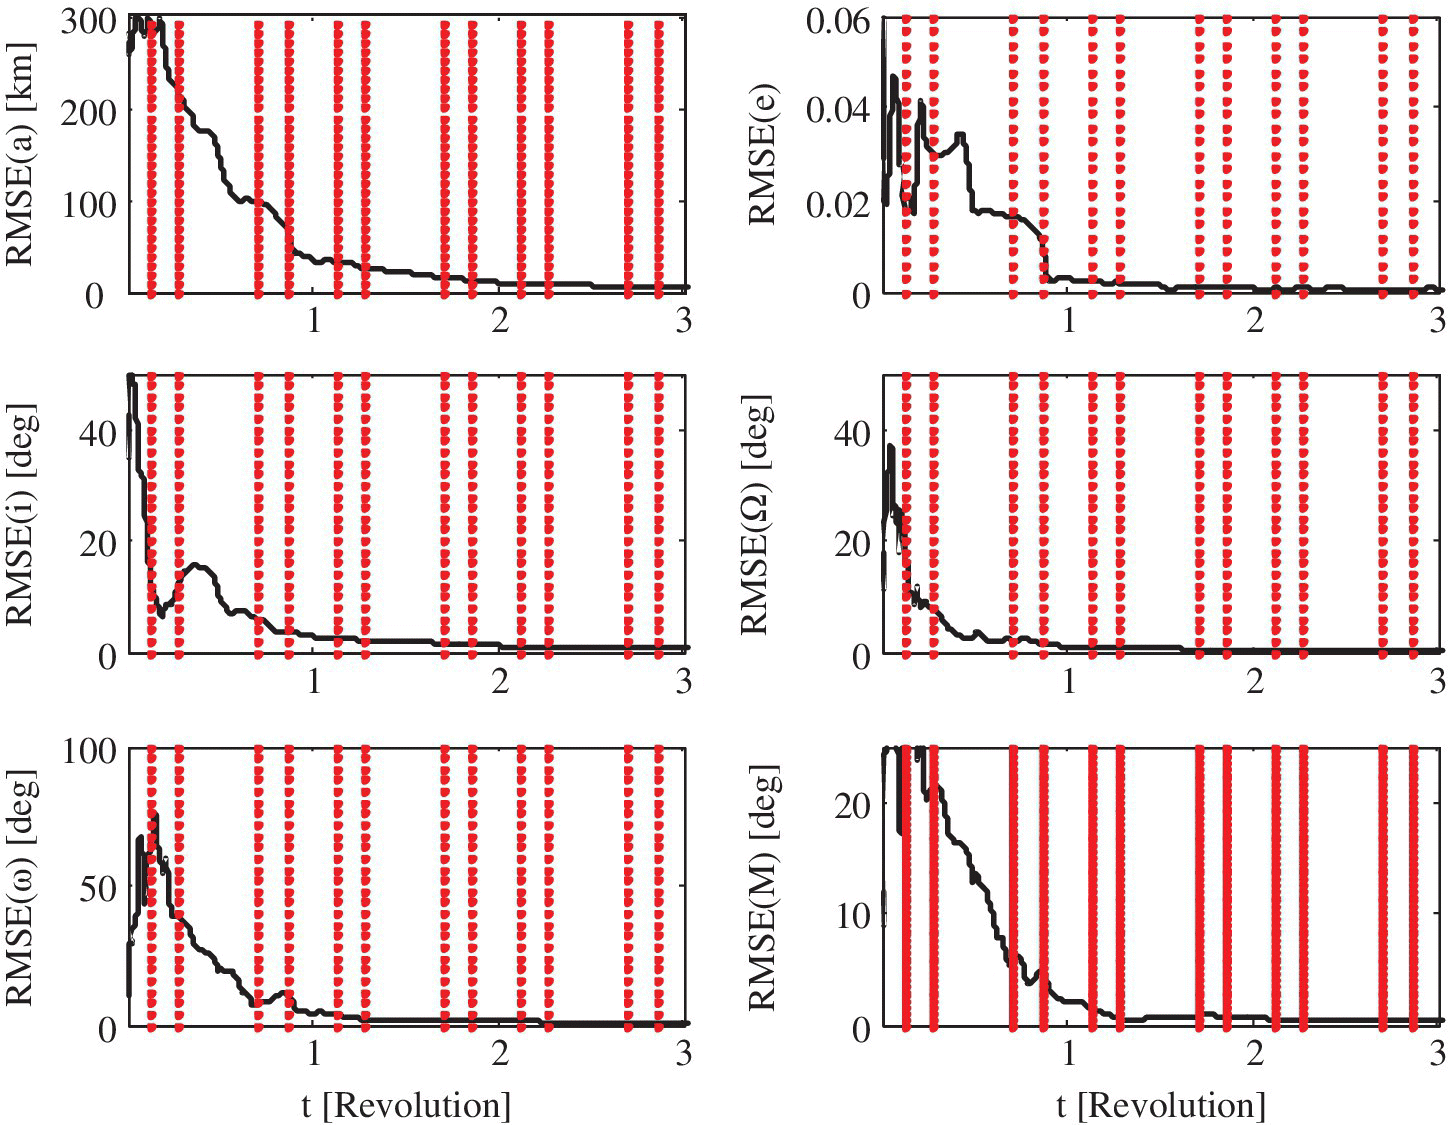 6 Graphs of RMSE of orbital elements considering eclipse durations displaying descending line plots with vertical dotted lines.